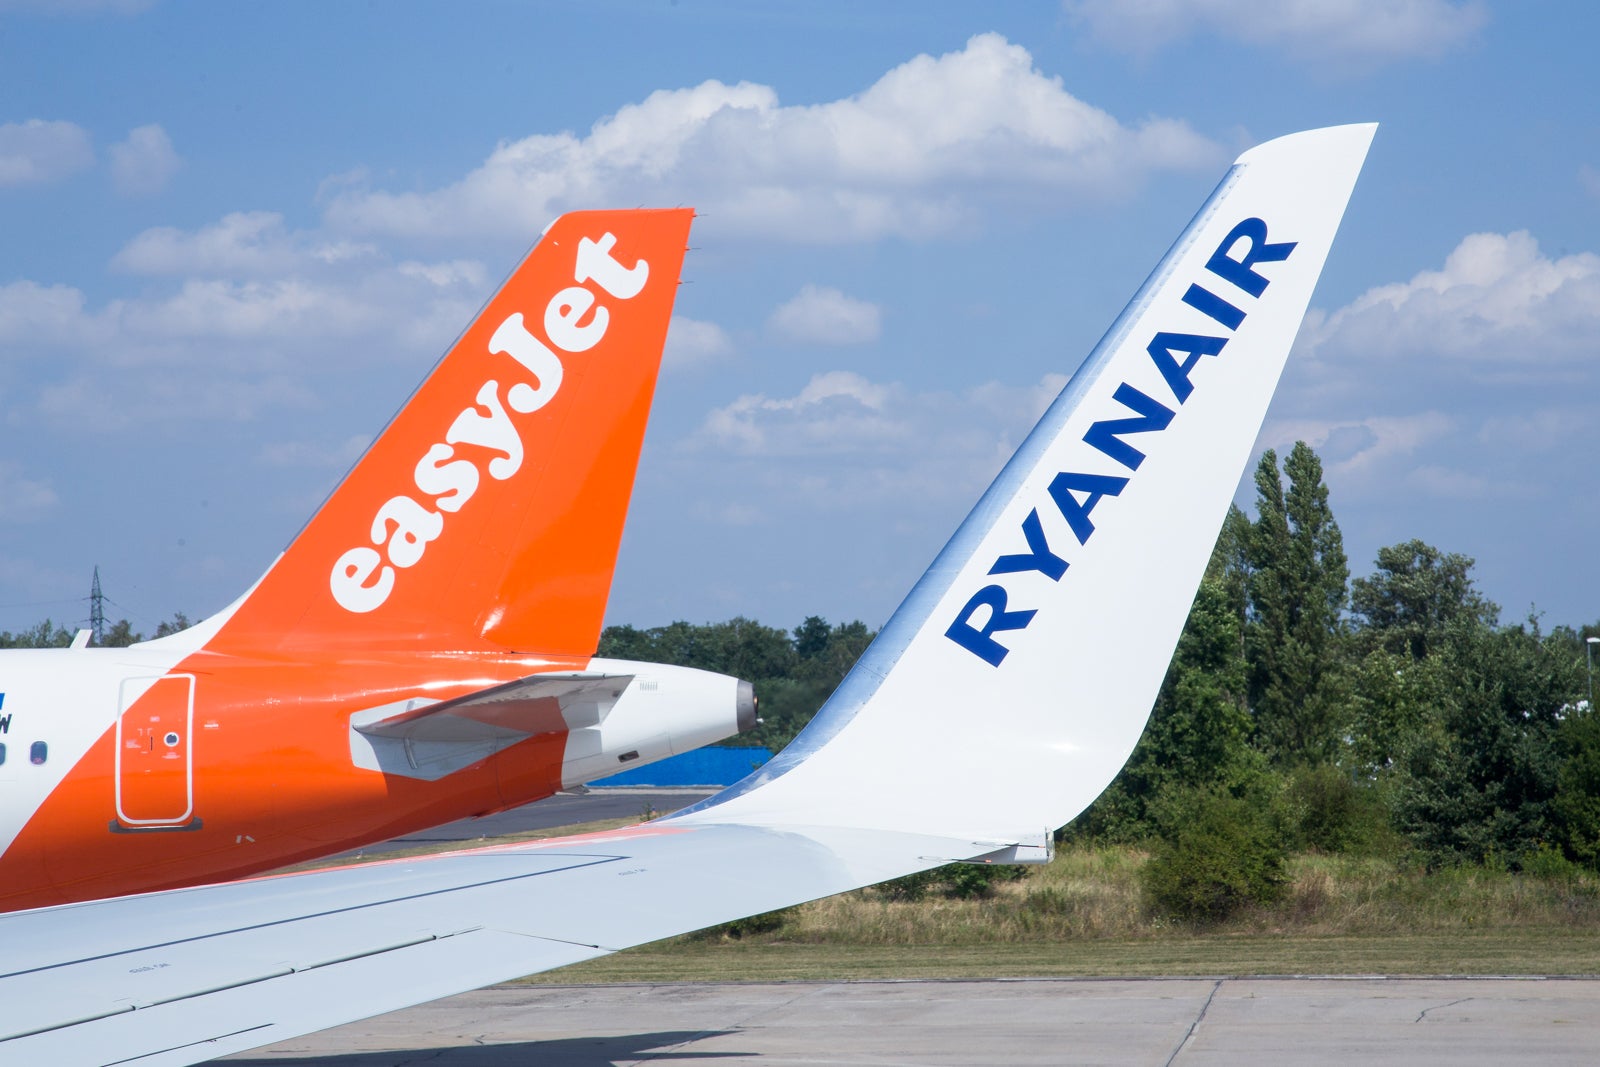 Airplane tail of Ryanair and Eesy Jet lowcost airlanes standing side by side at the airport.